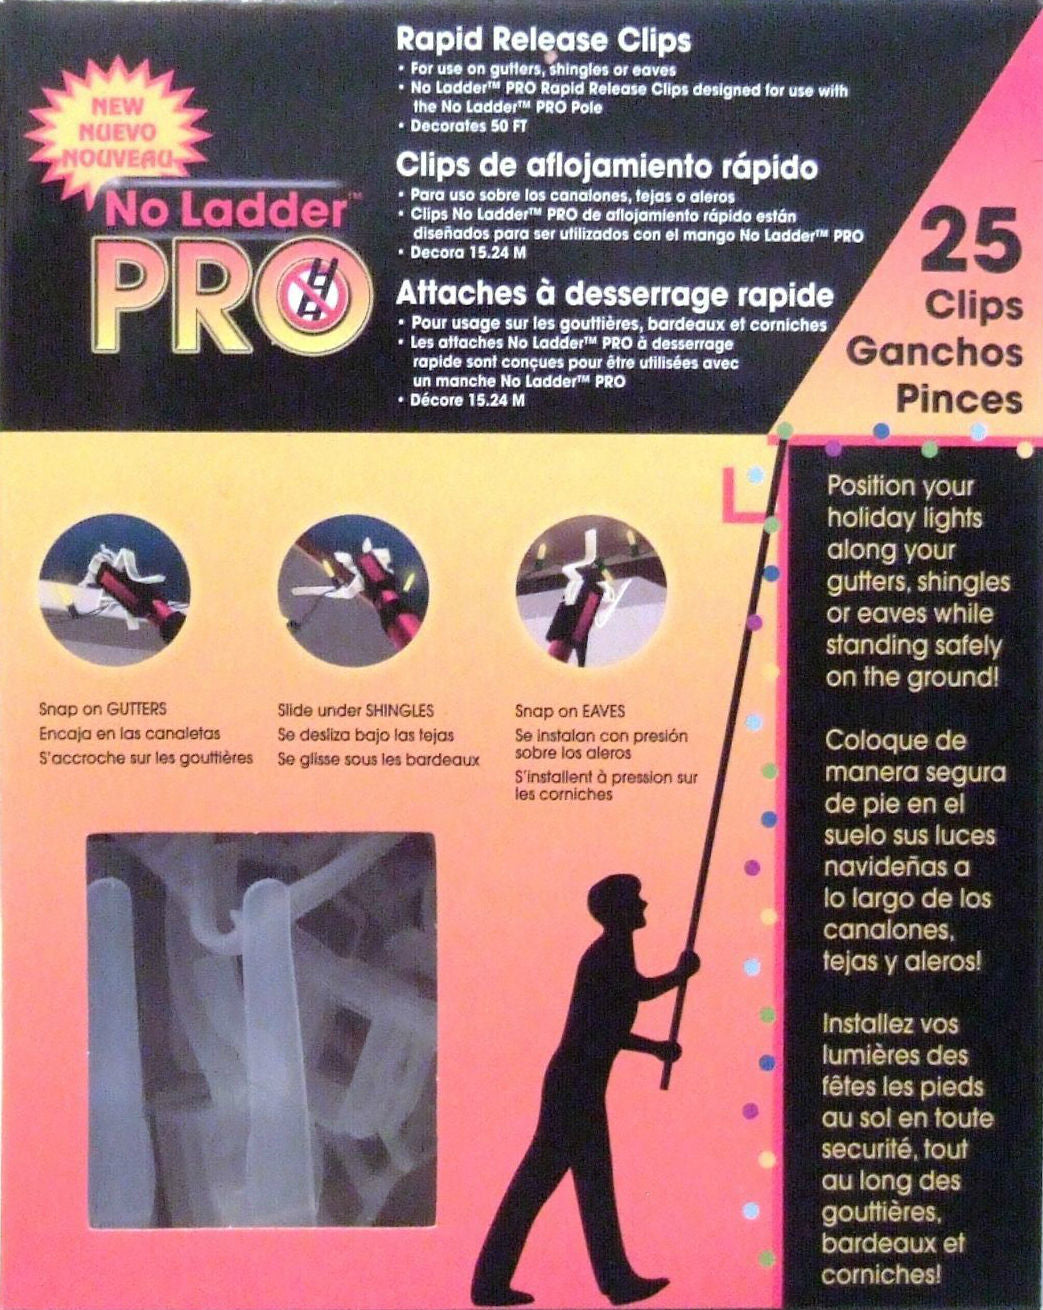 Dyno 74029-25C No Ladder™ Pro Rapid Release Christmas Light Clips, 25-Count